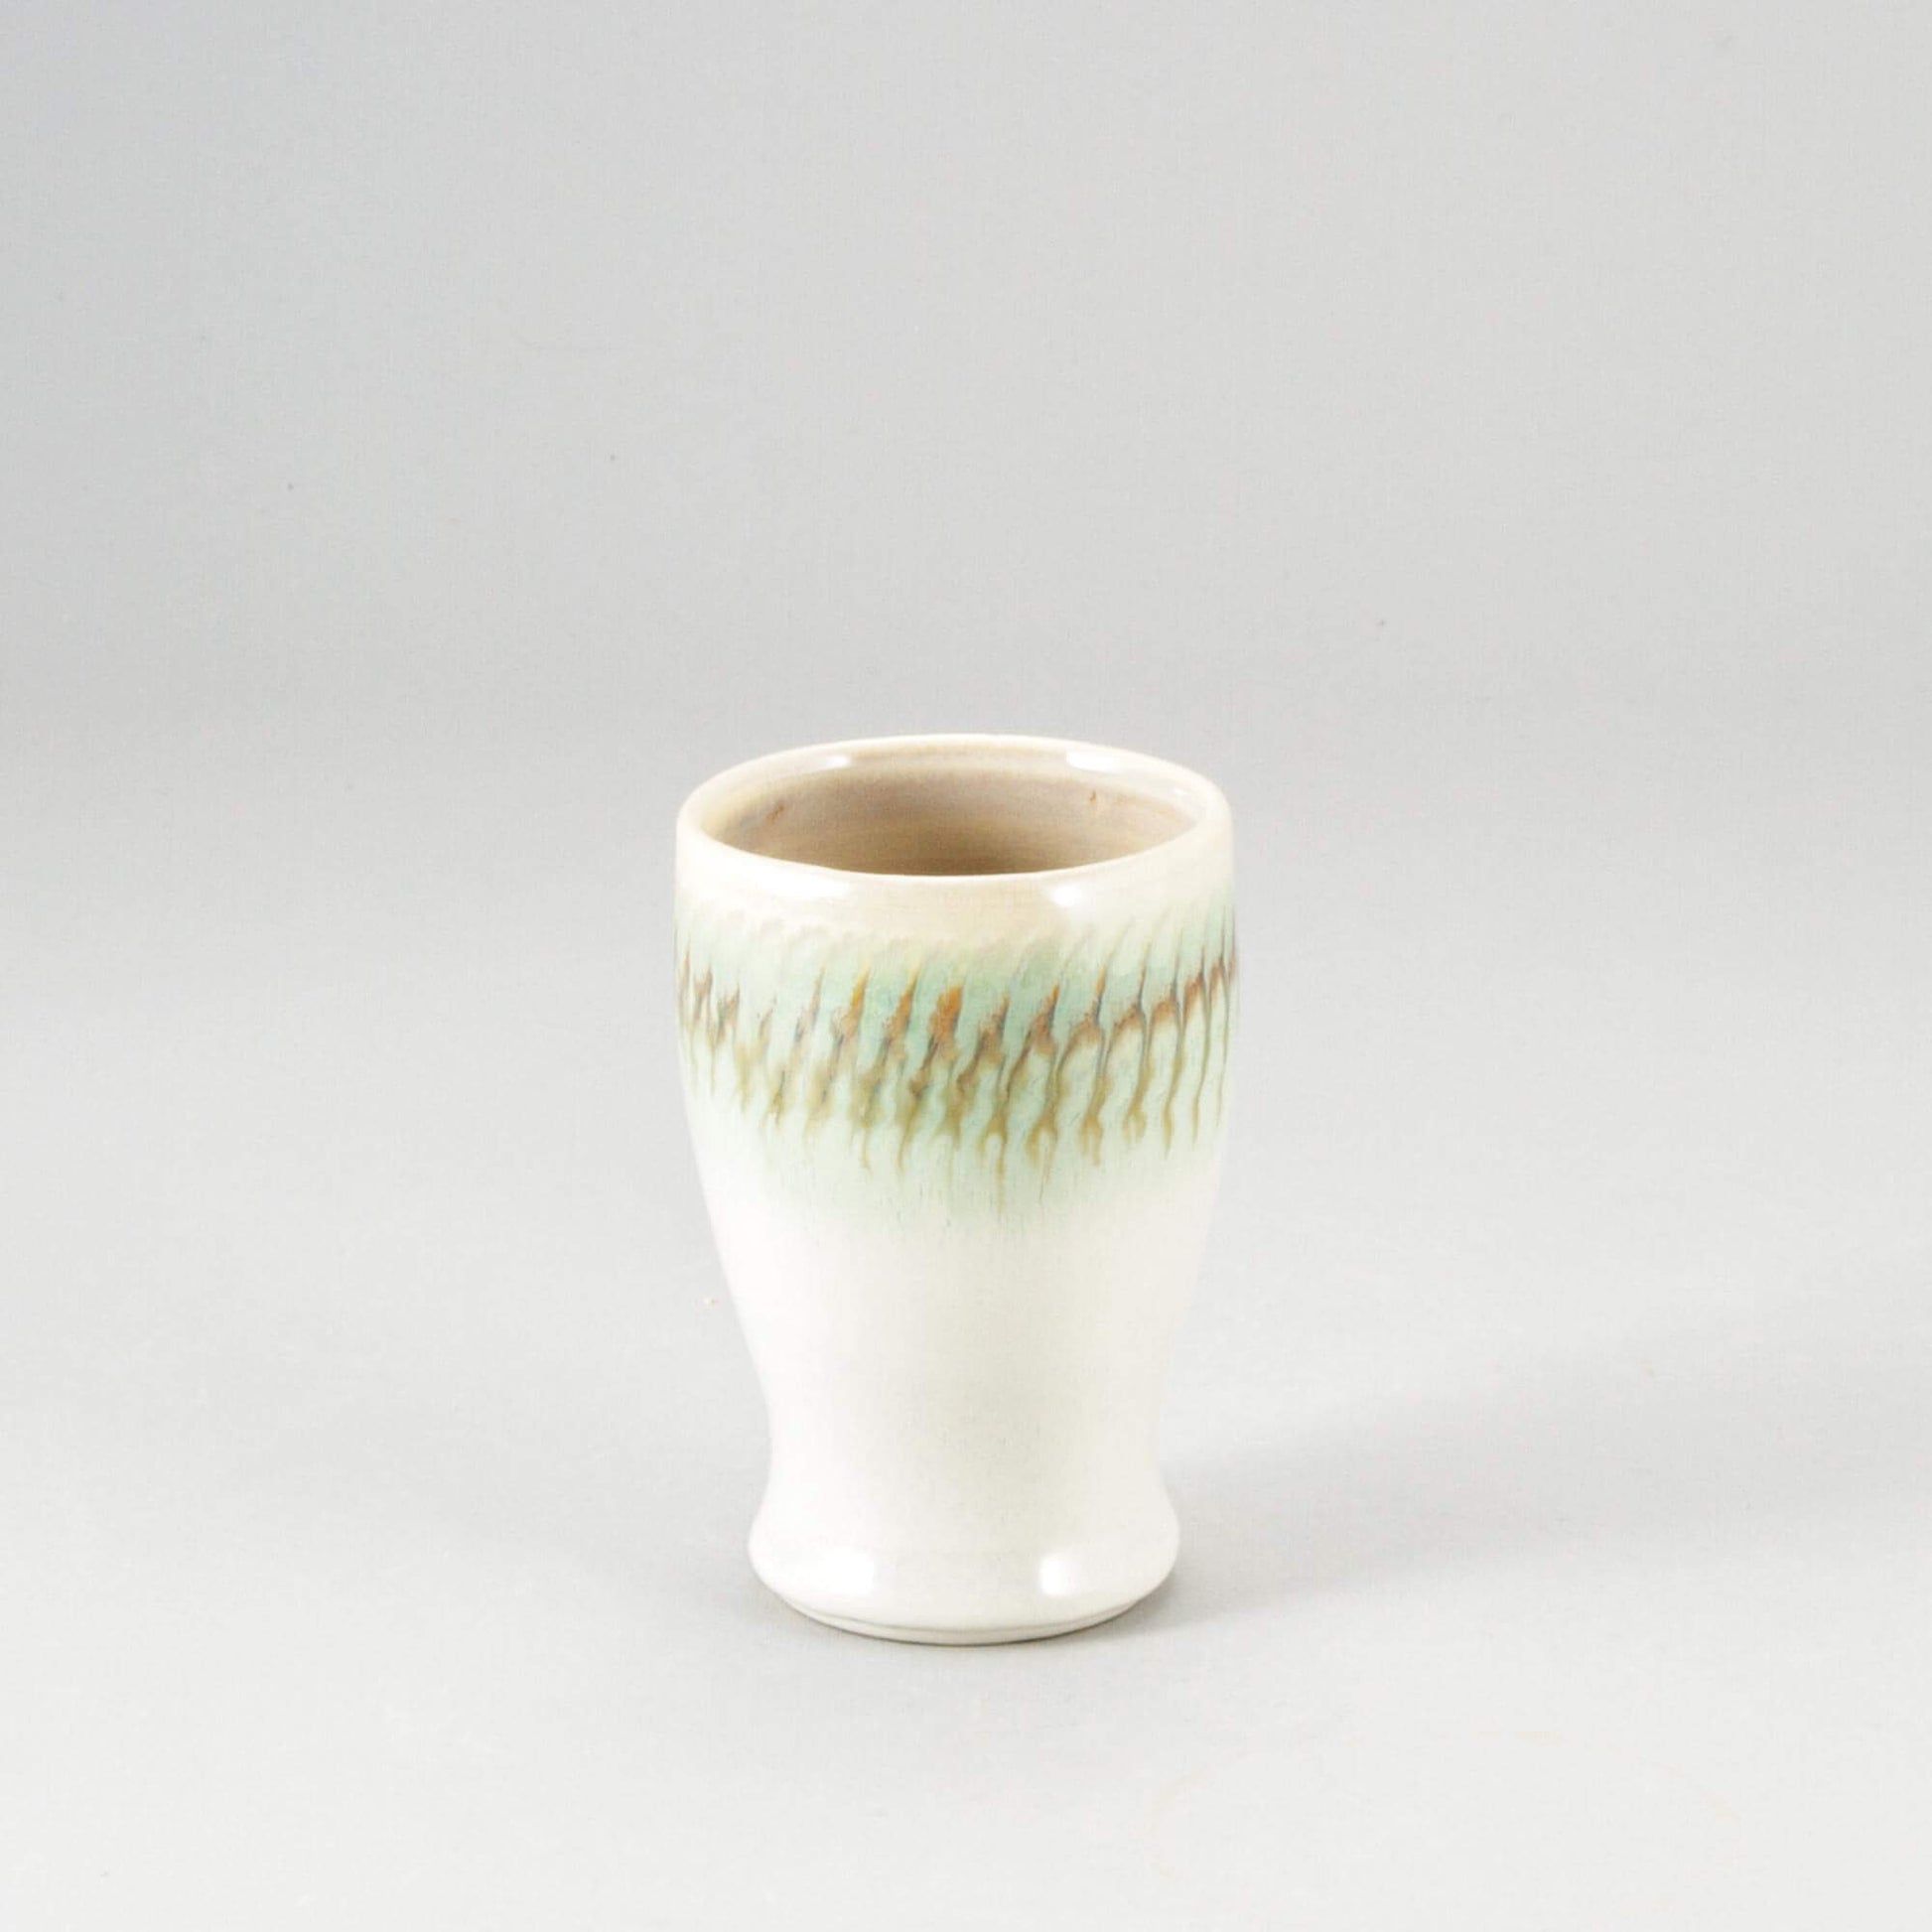 Handmade Pottery Curvy Tumbler in Ivory & Green pattern made by Georgetown Pottery in Maine